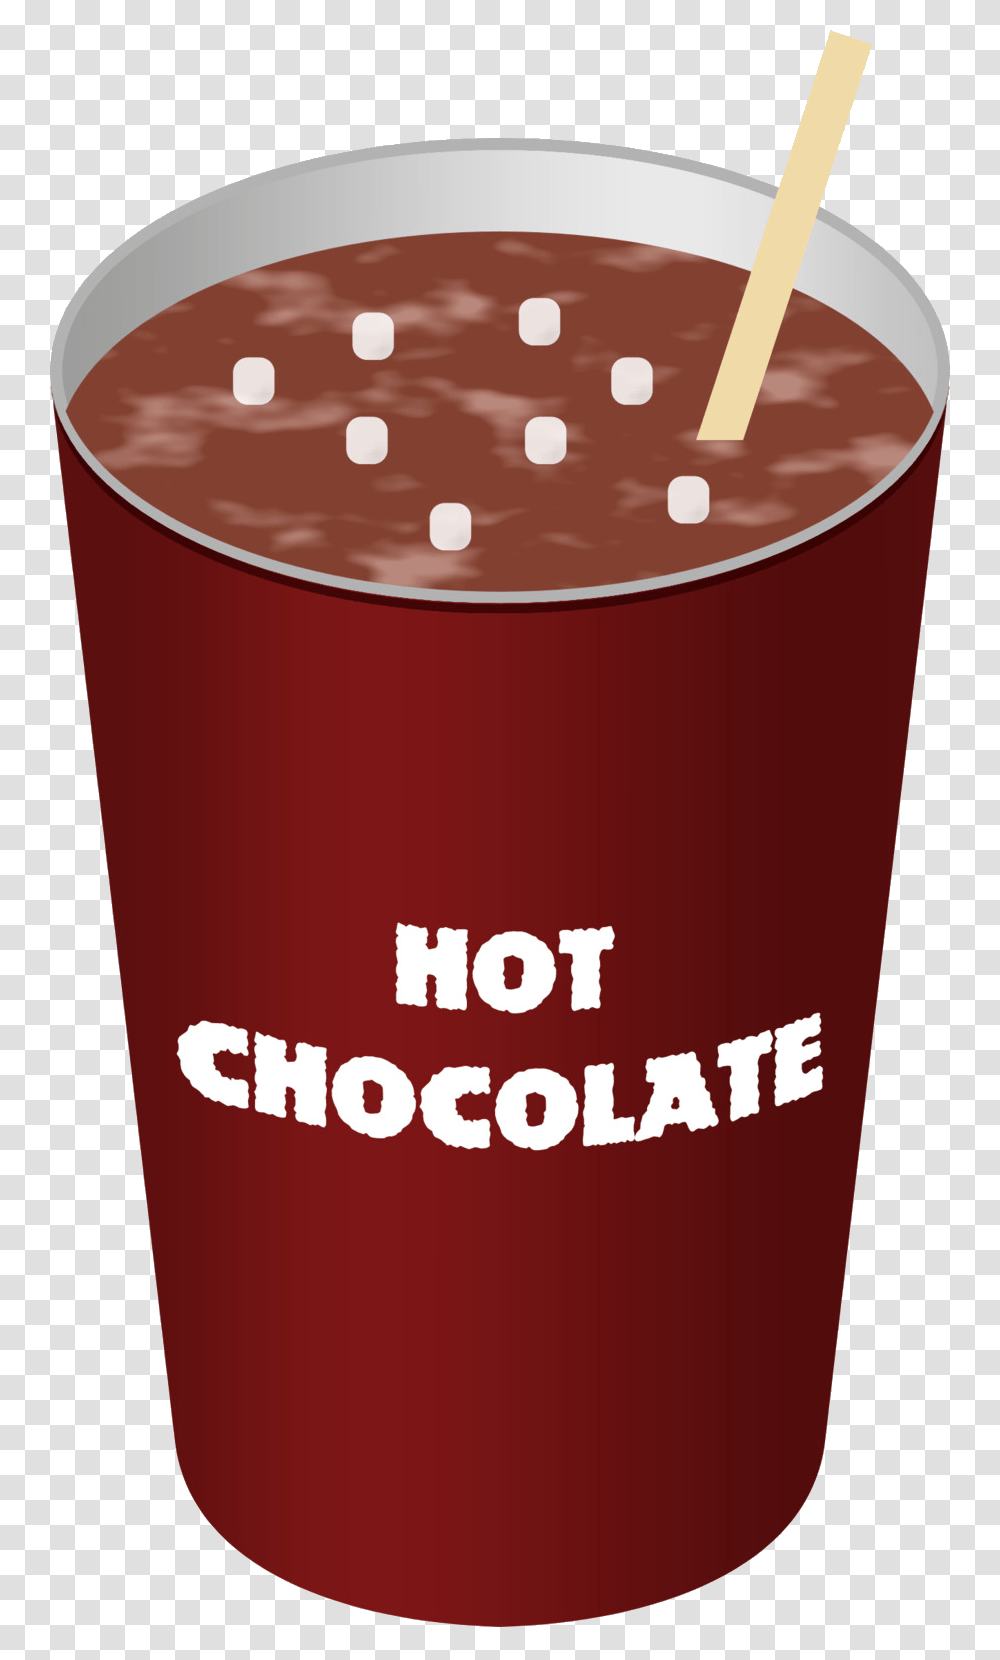 Hot Chocolate Milk Clip Art Cocoa Free Clip Art Of Hot Chocolate, Coffee Cup, Latte, Beverage, Drink Transparent Png